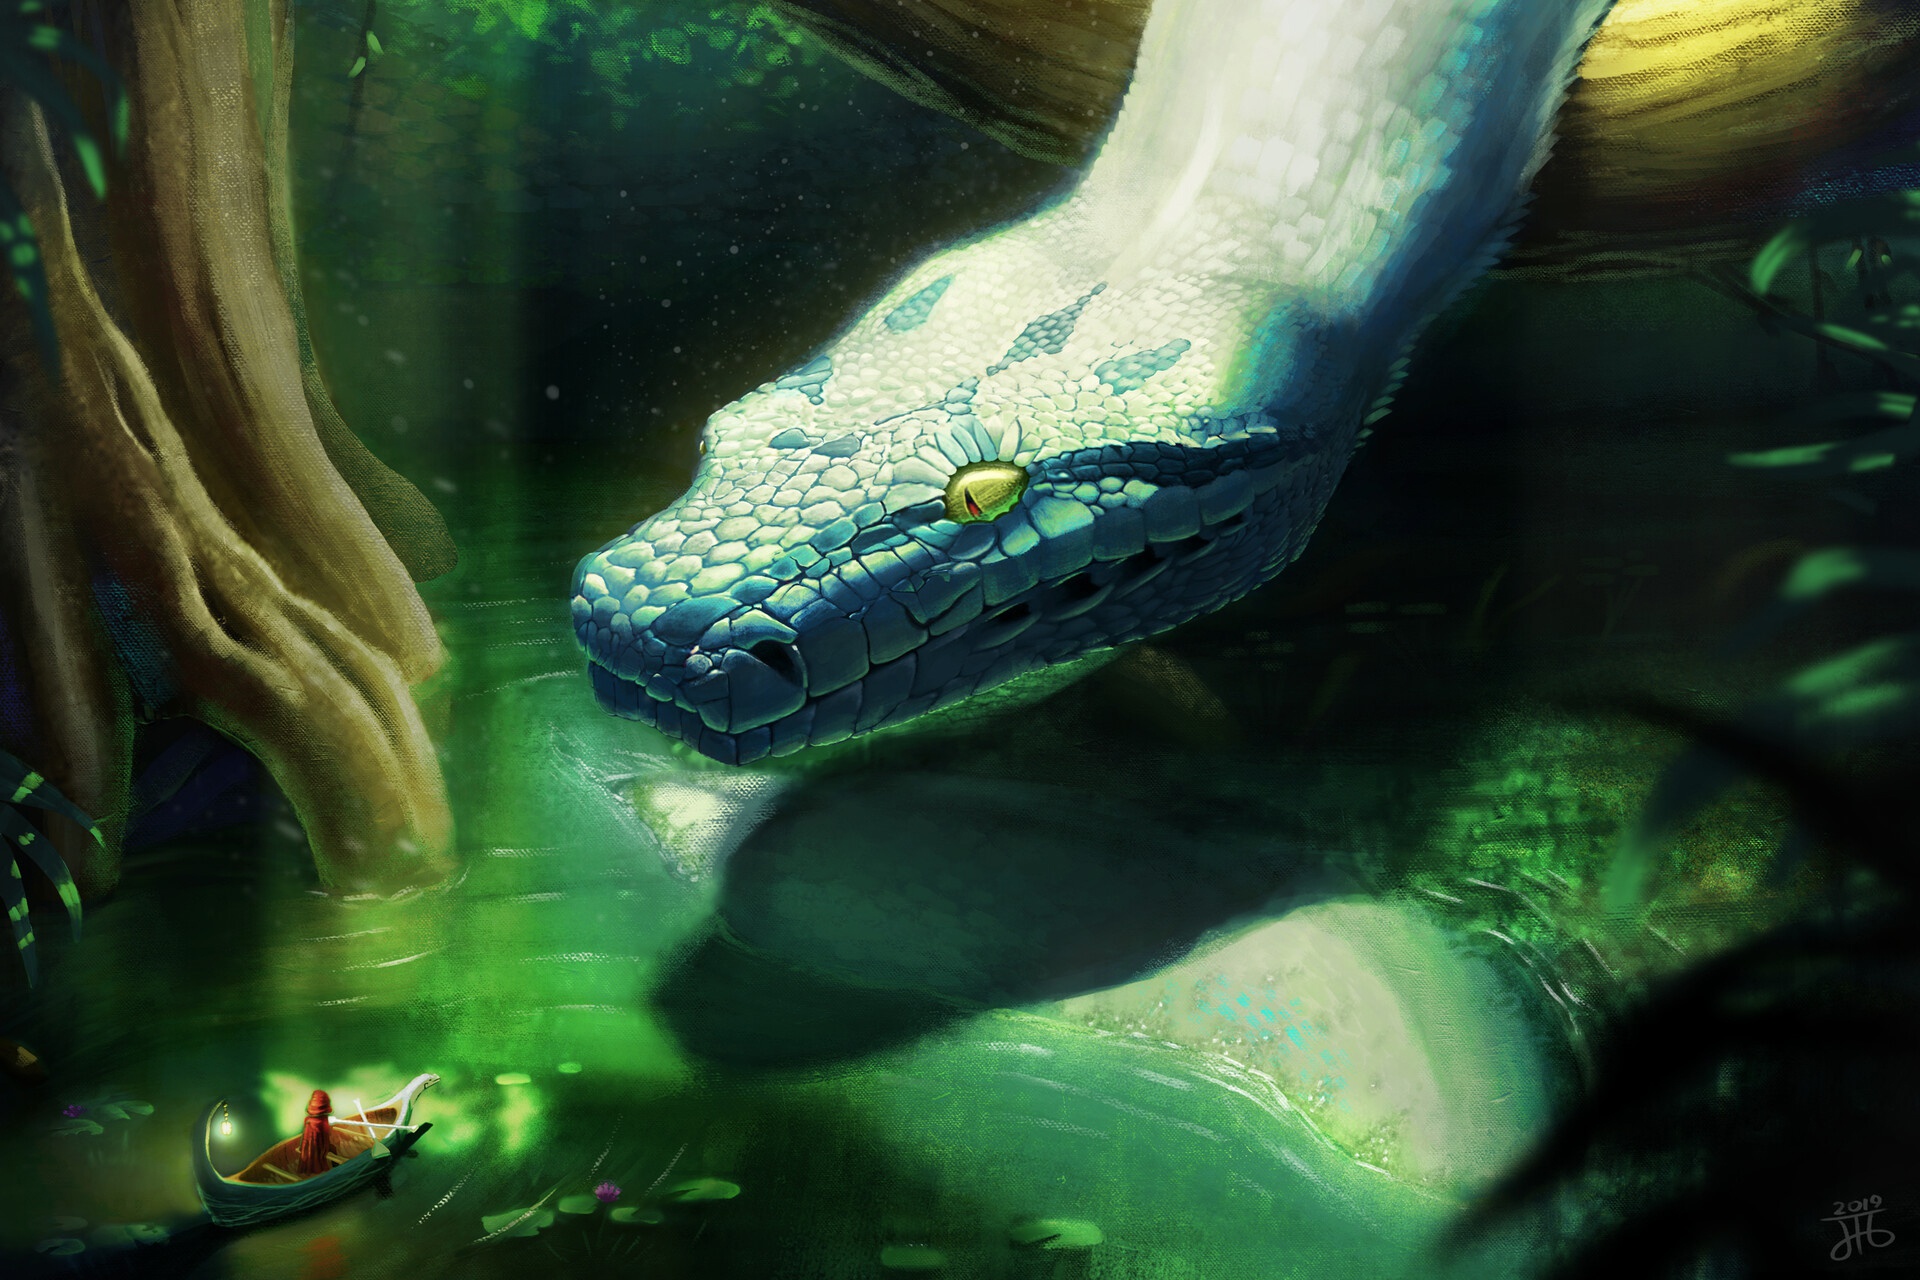 Boat Creature Giant Snake Wallpaper:1920x1280